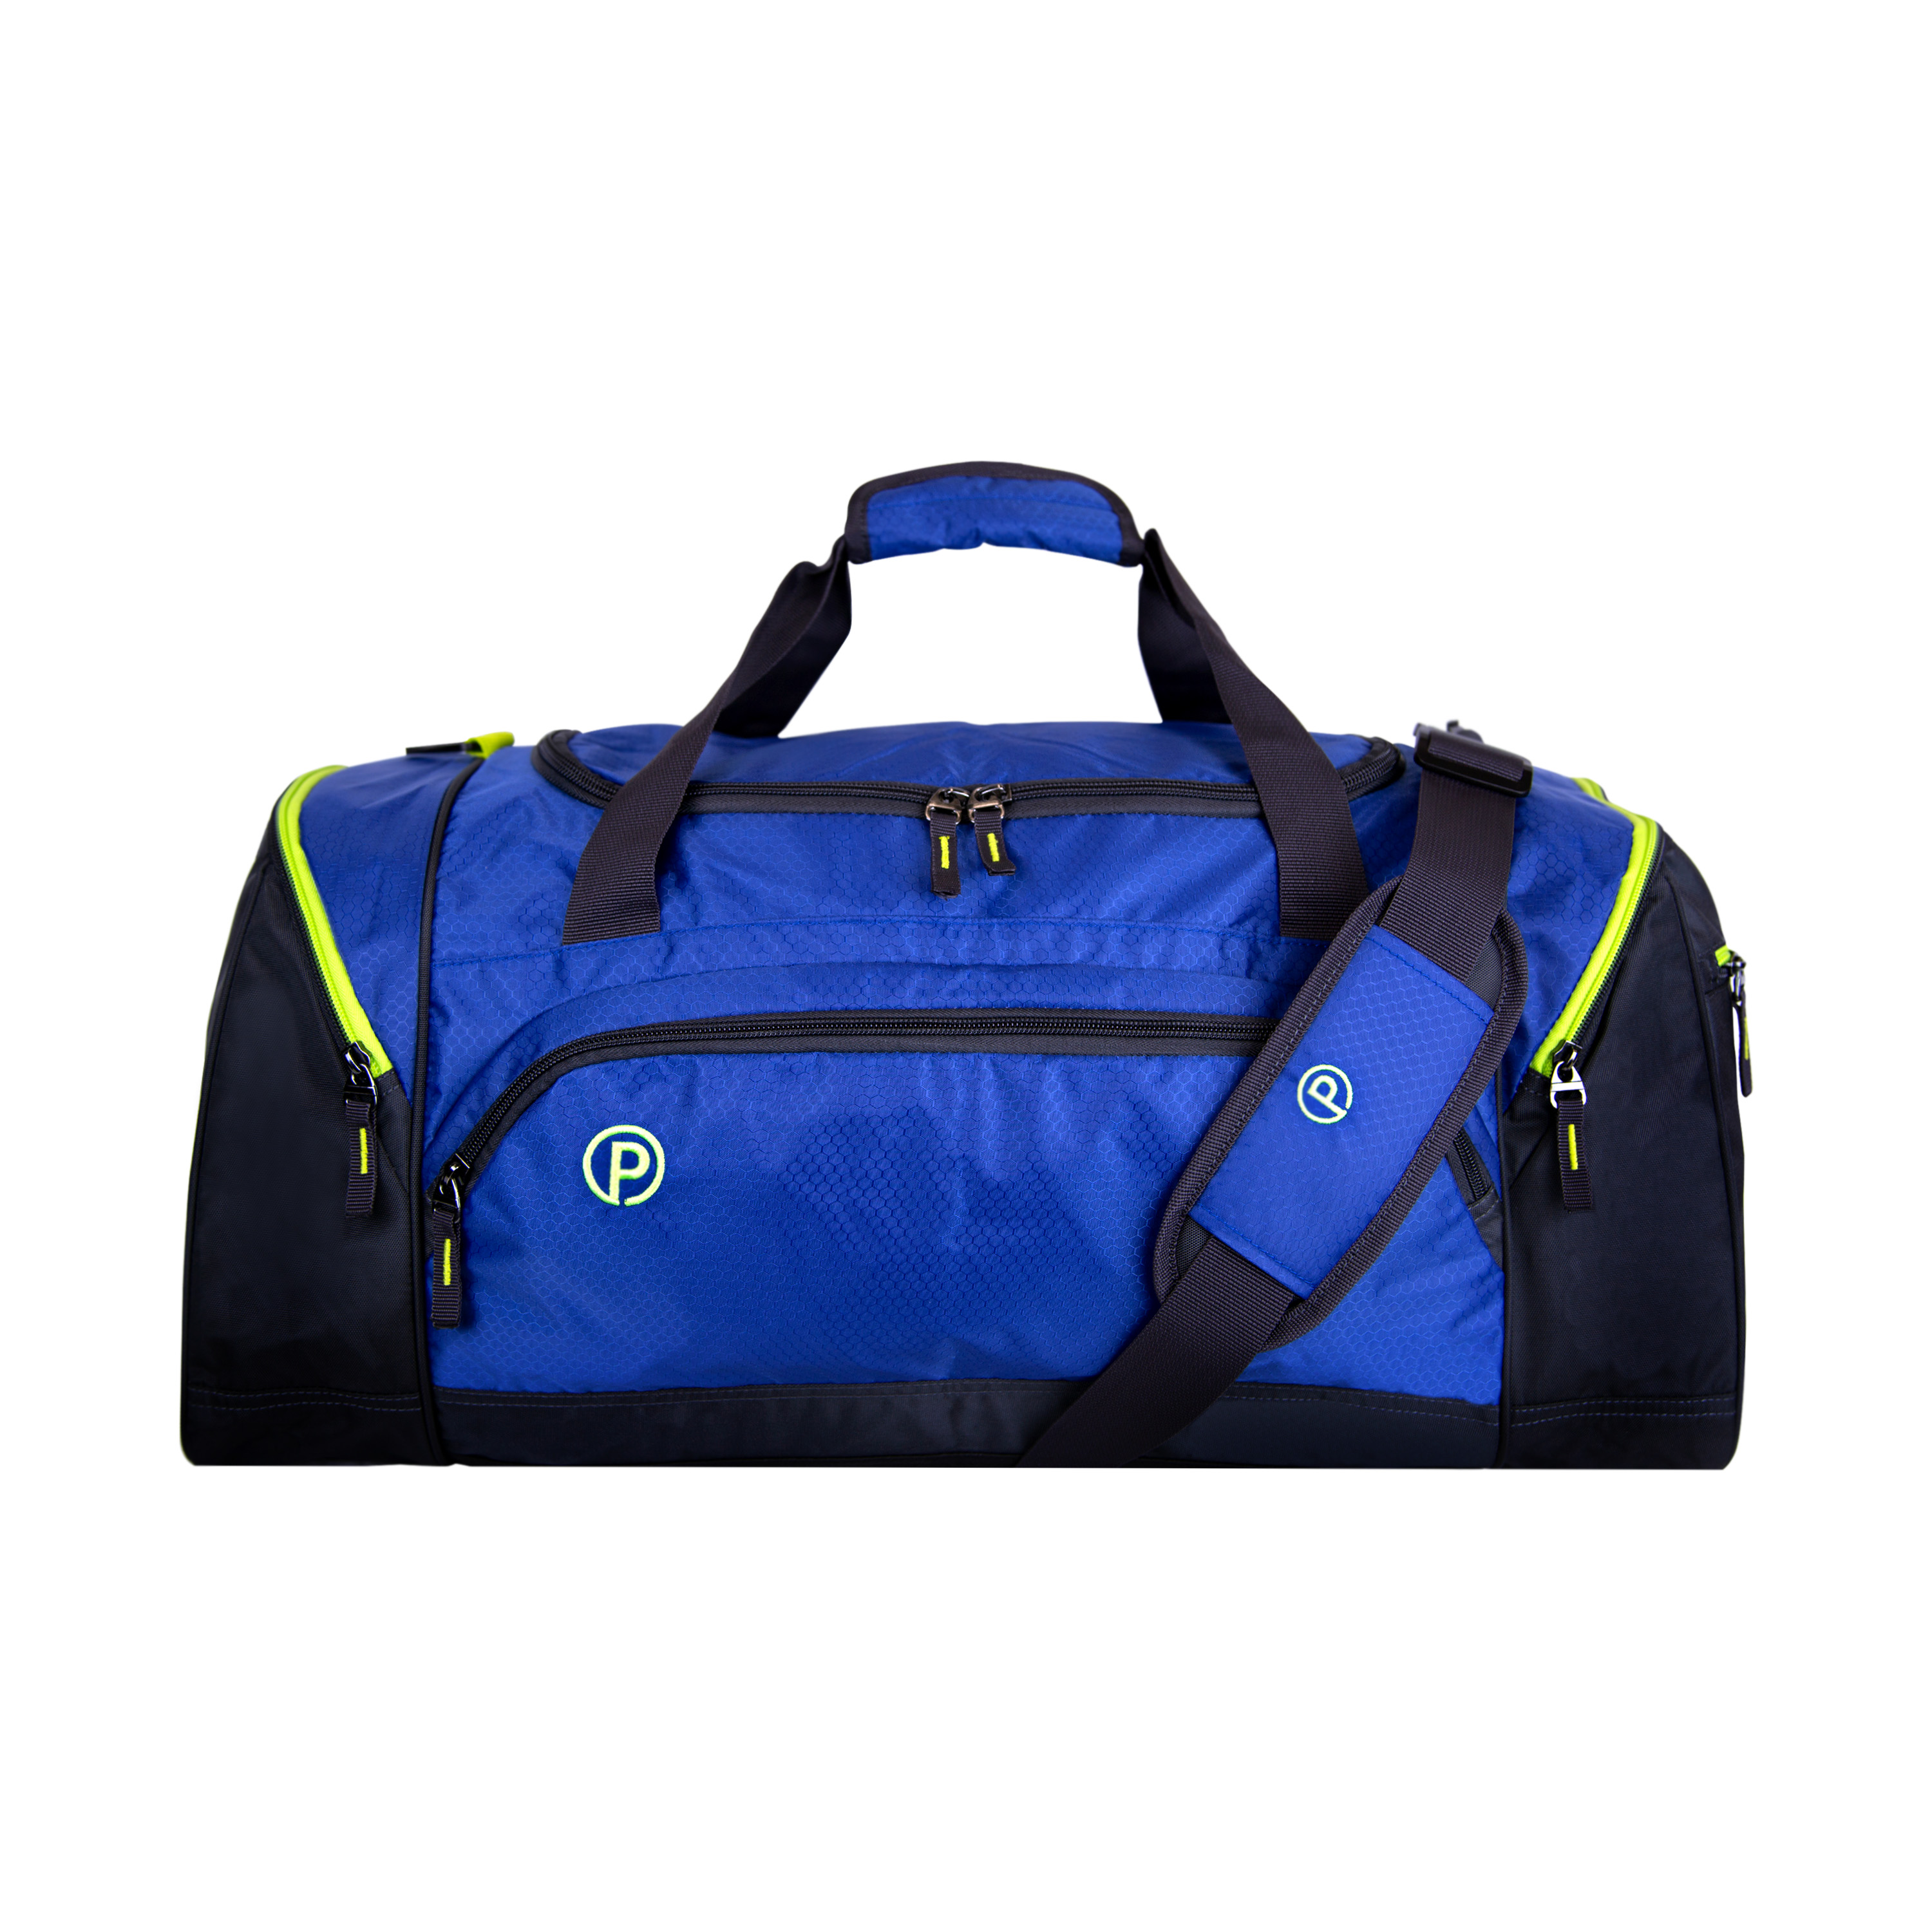 Protege Unisex 24" Solid Duffel Bag Perfect for Multi-Day Travel, Blue - image 1 of 6